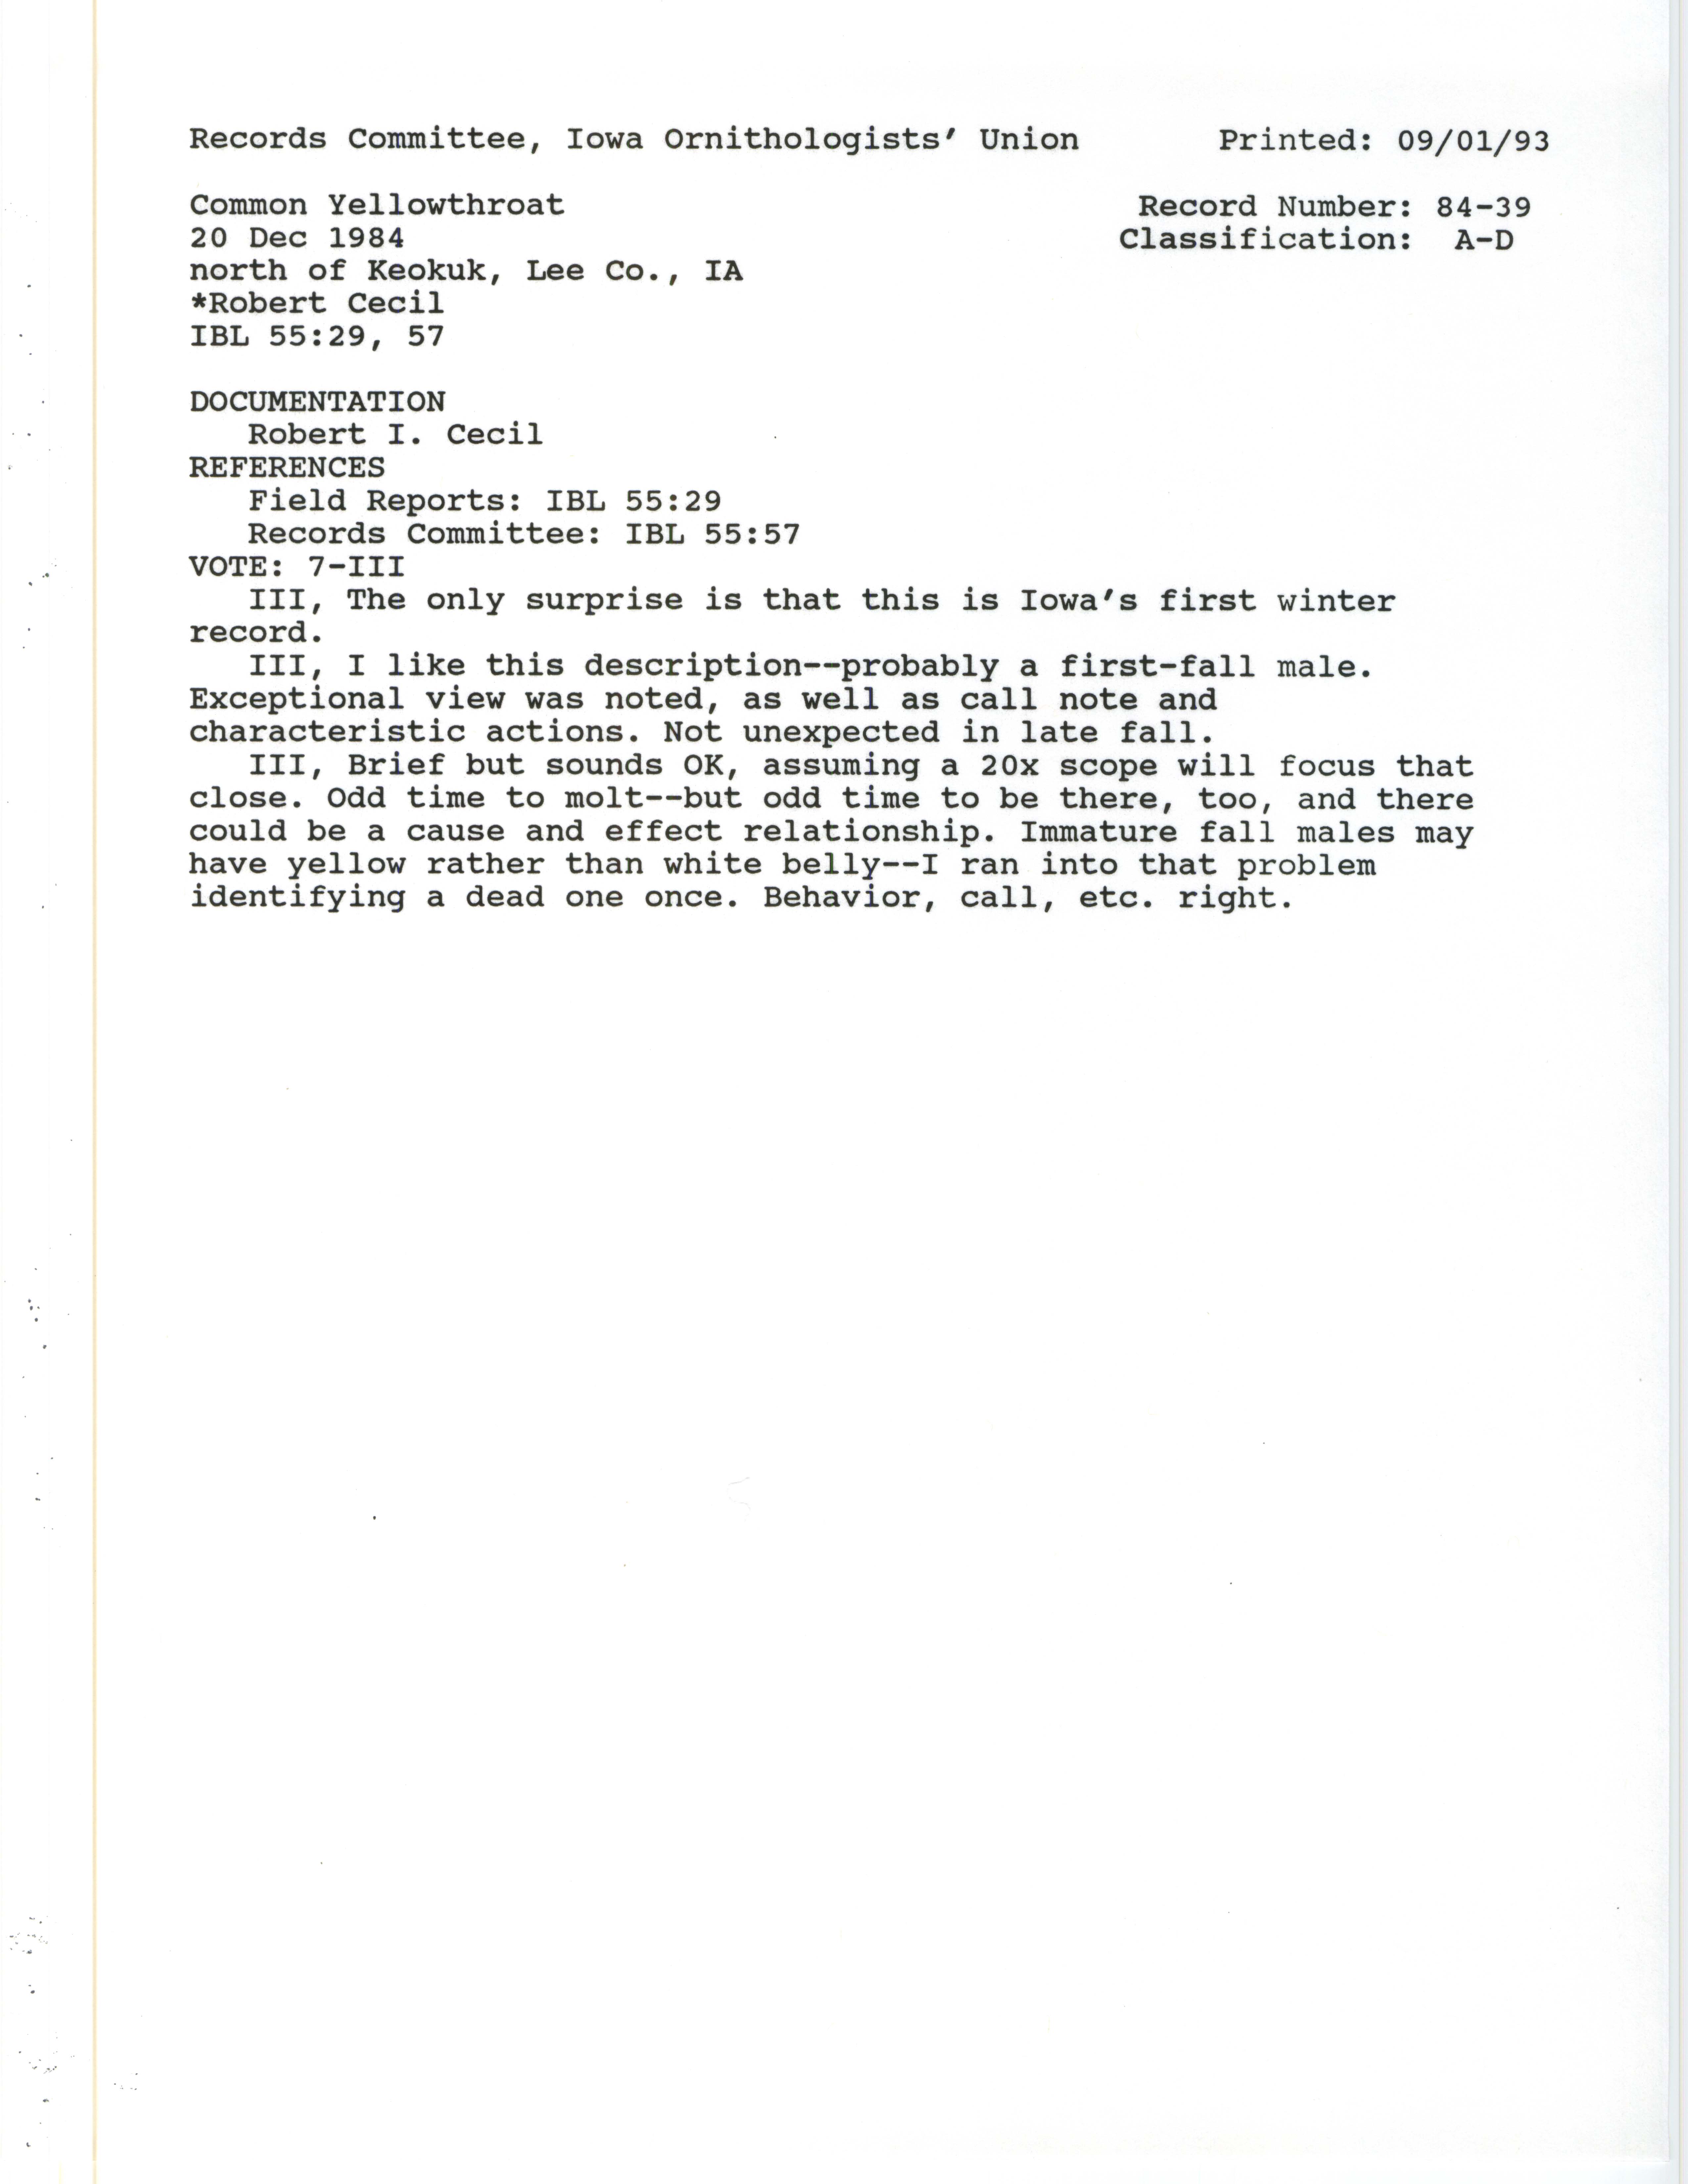 Records Committee review for rare bird sighting for Common Yellowthroat north of Keokuk, 1984